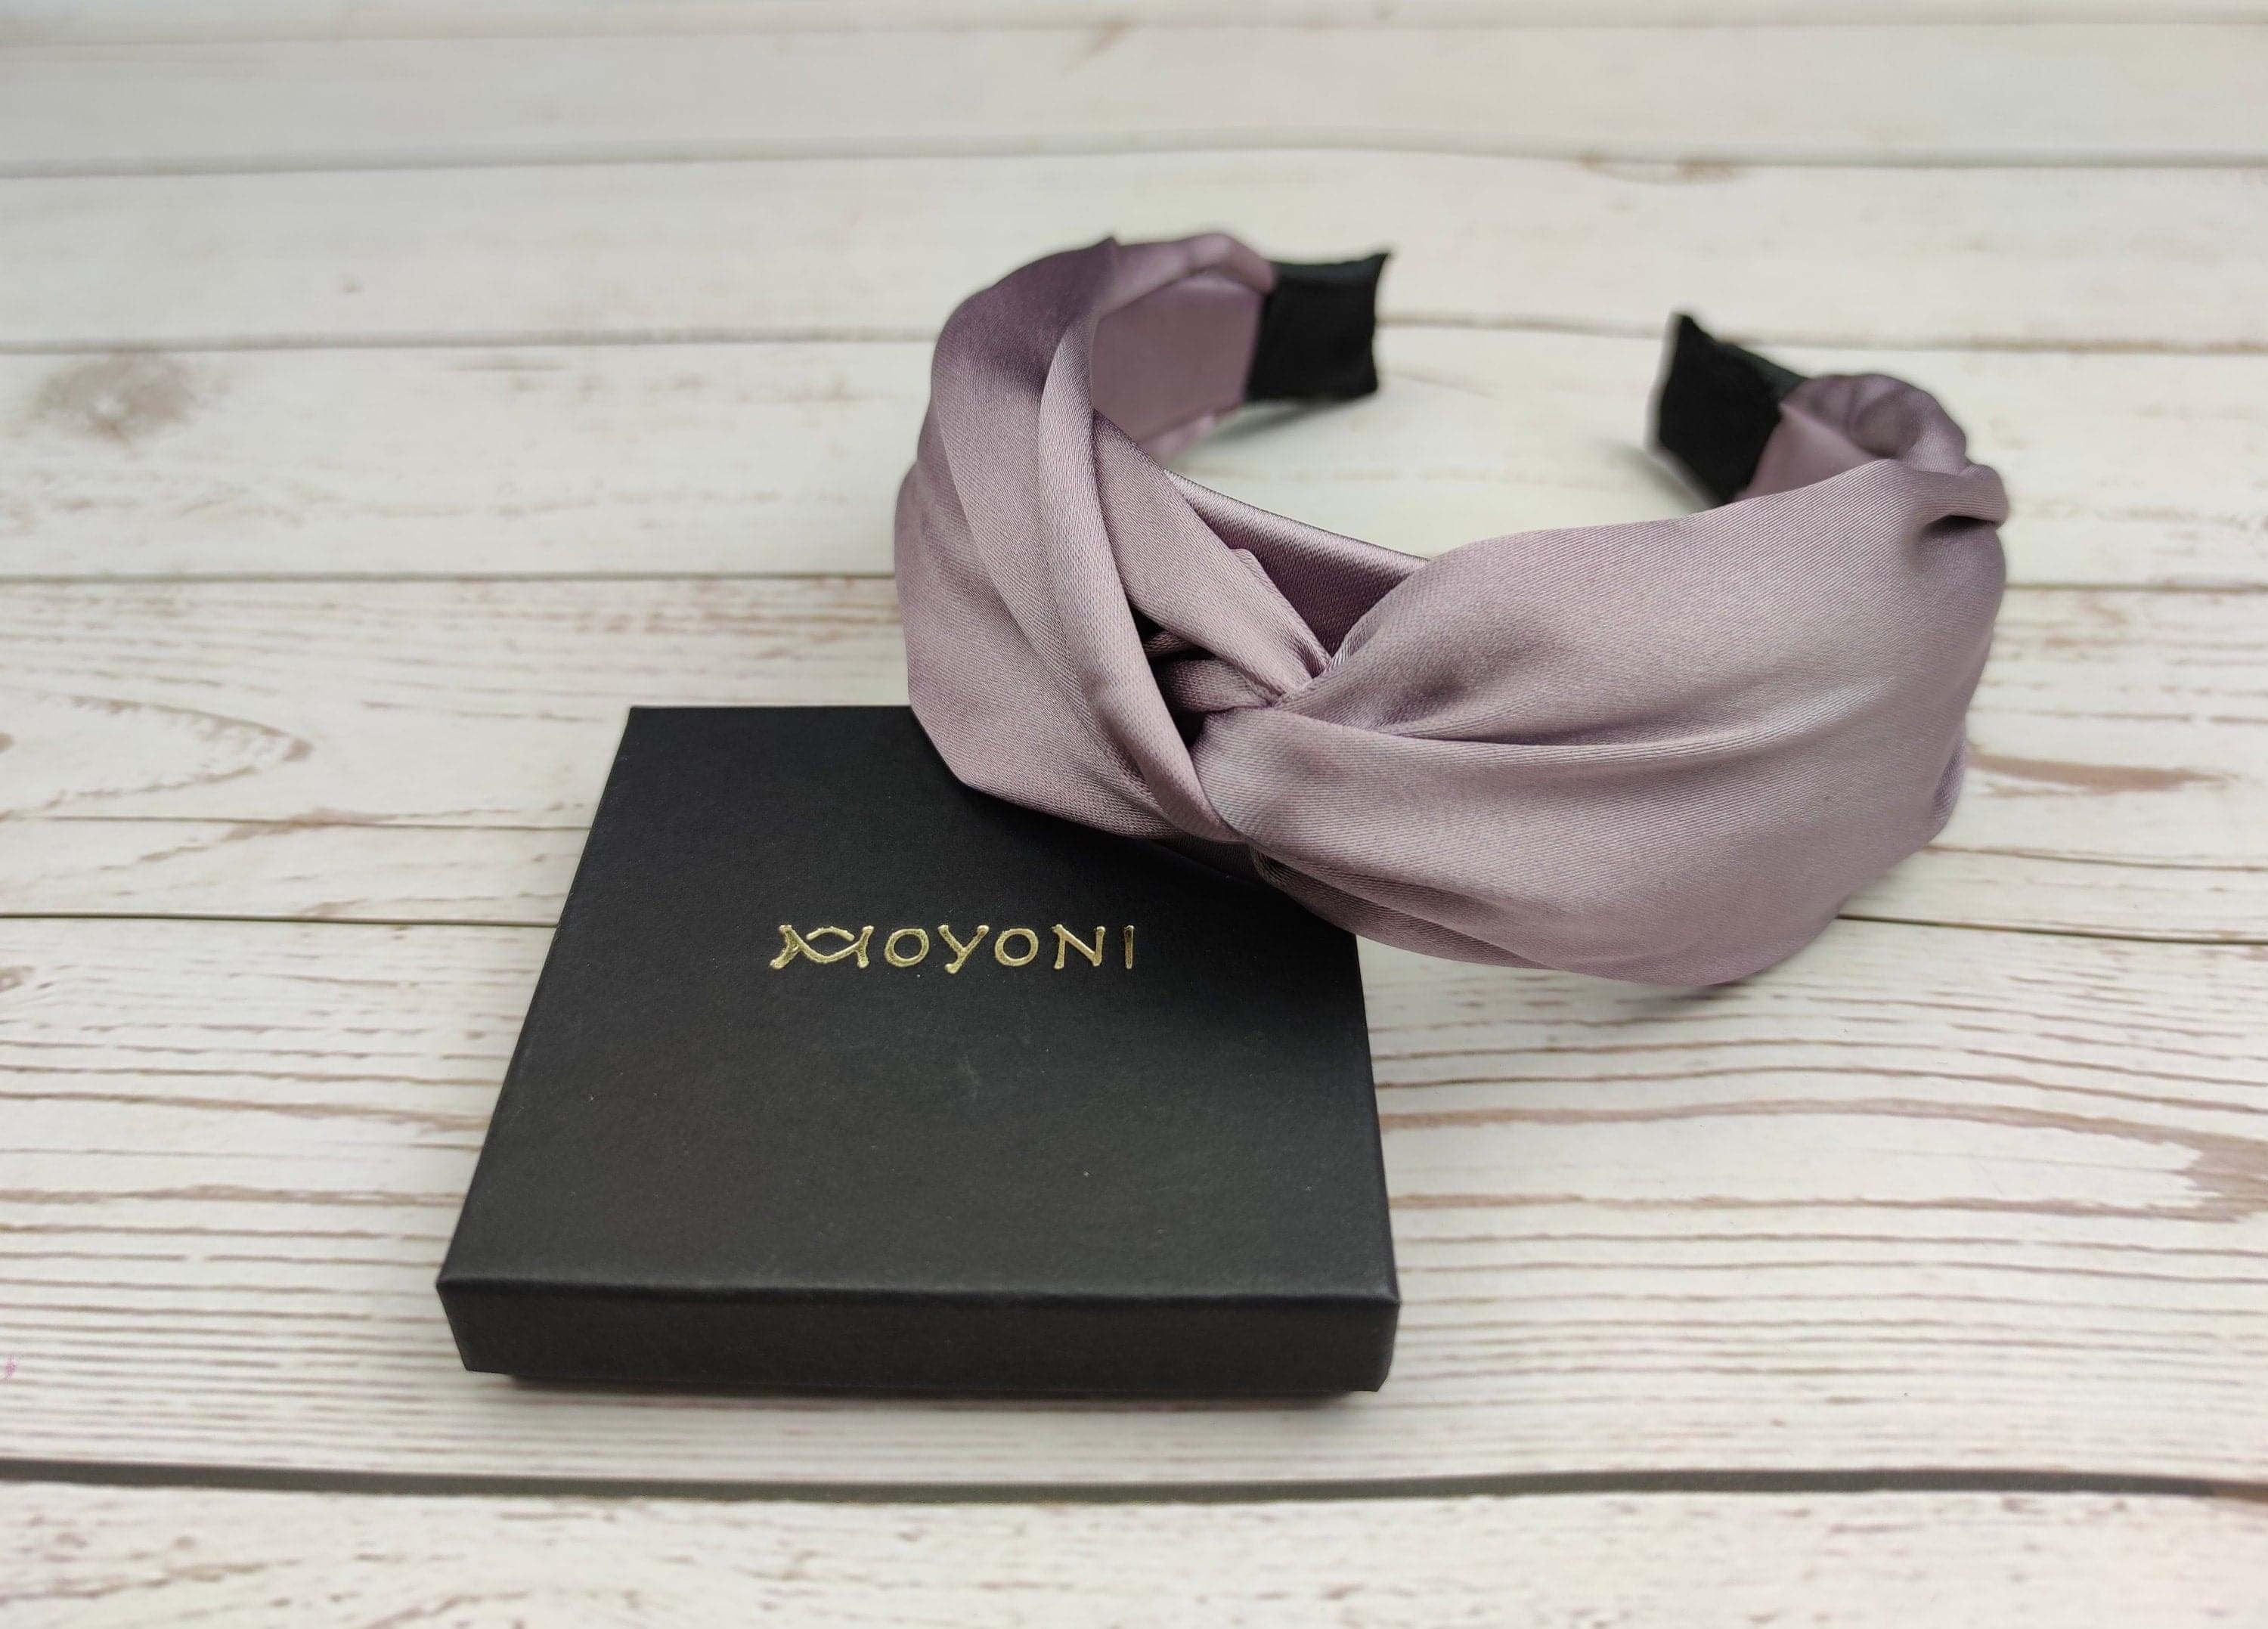 Charming Lilac Satin Knotted Headband without Padded - Stylish Women's Hair Accessory in Light Designer Color available at Moyoni Design